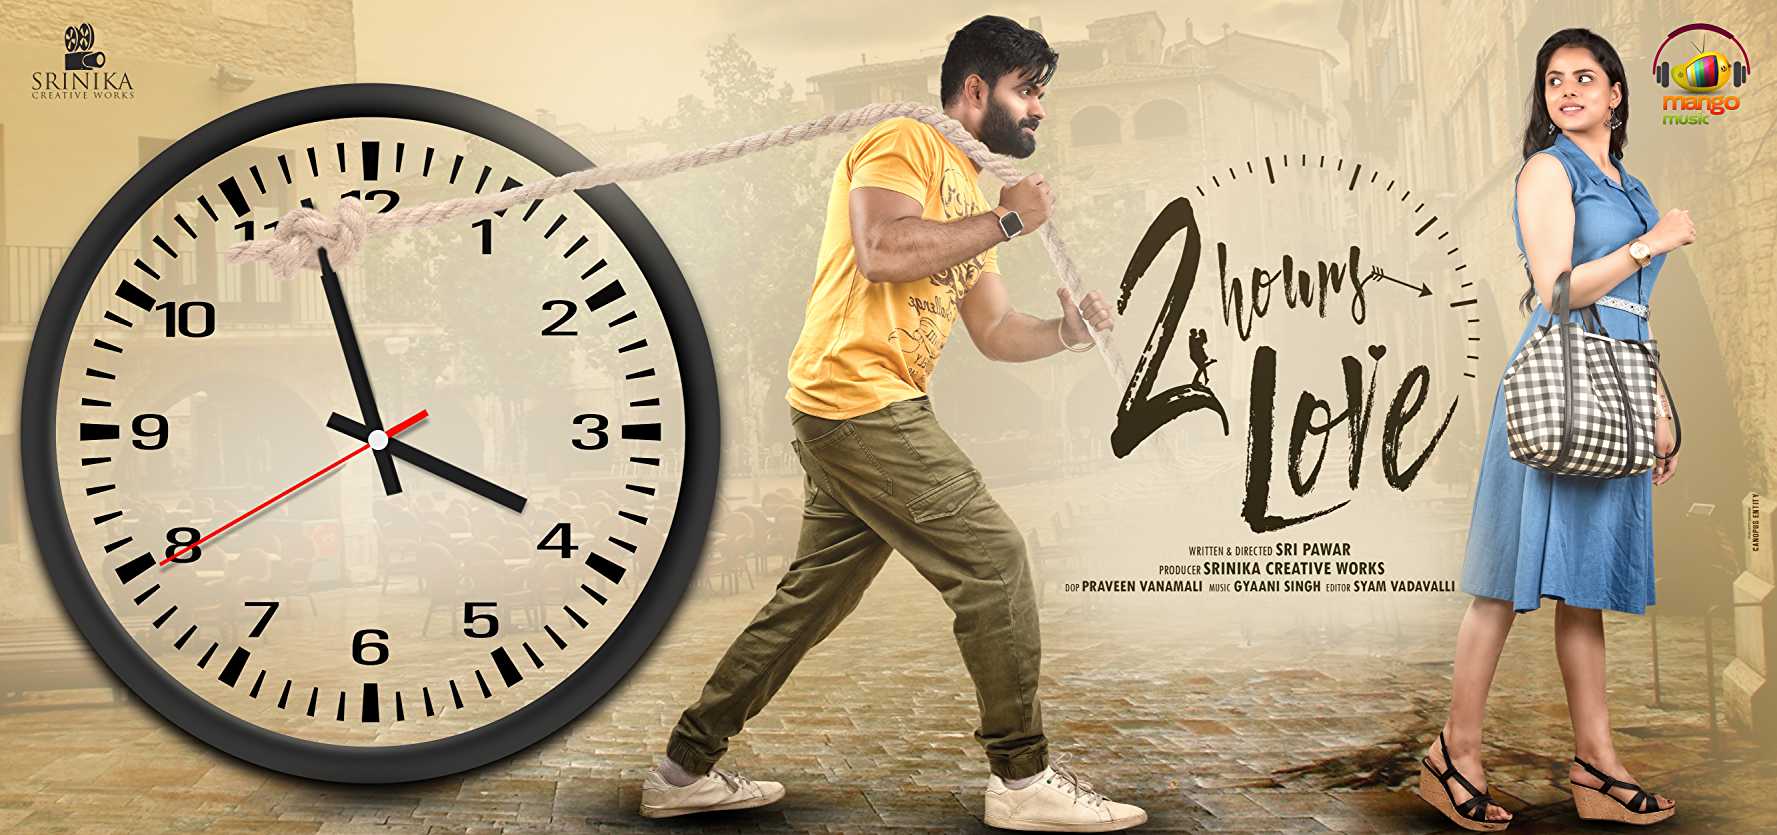 2 hours love movie review ratintg 3.25/5